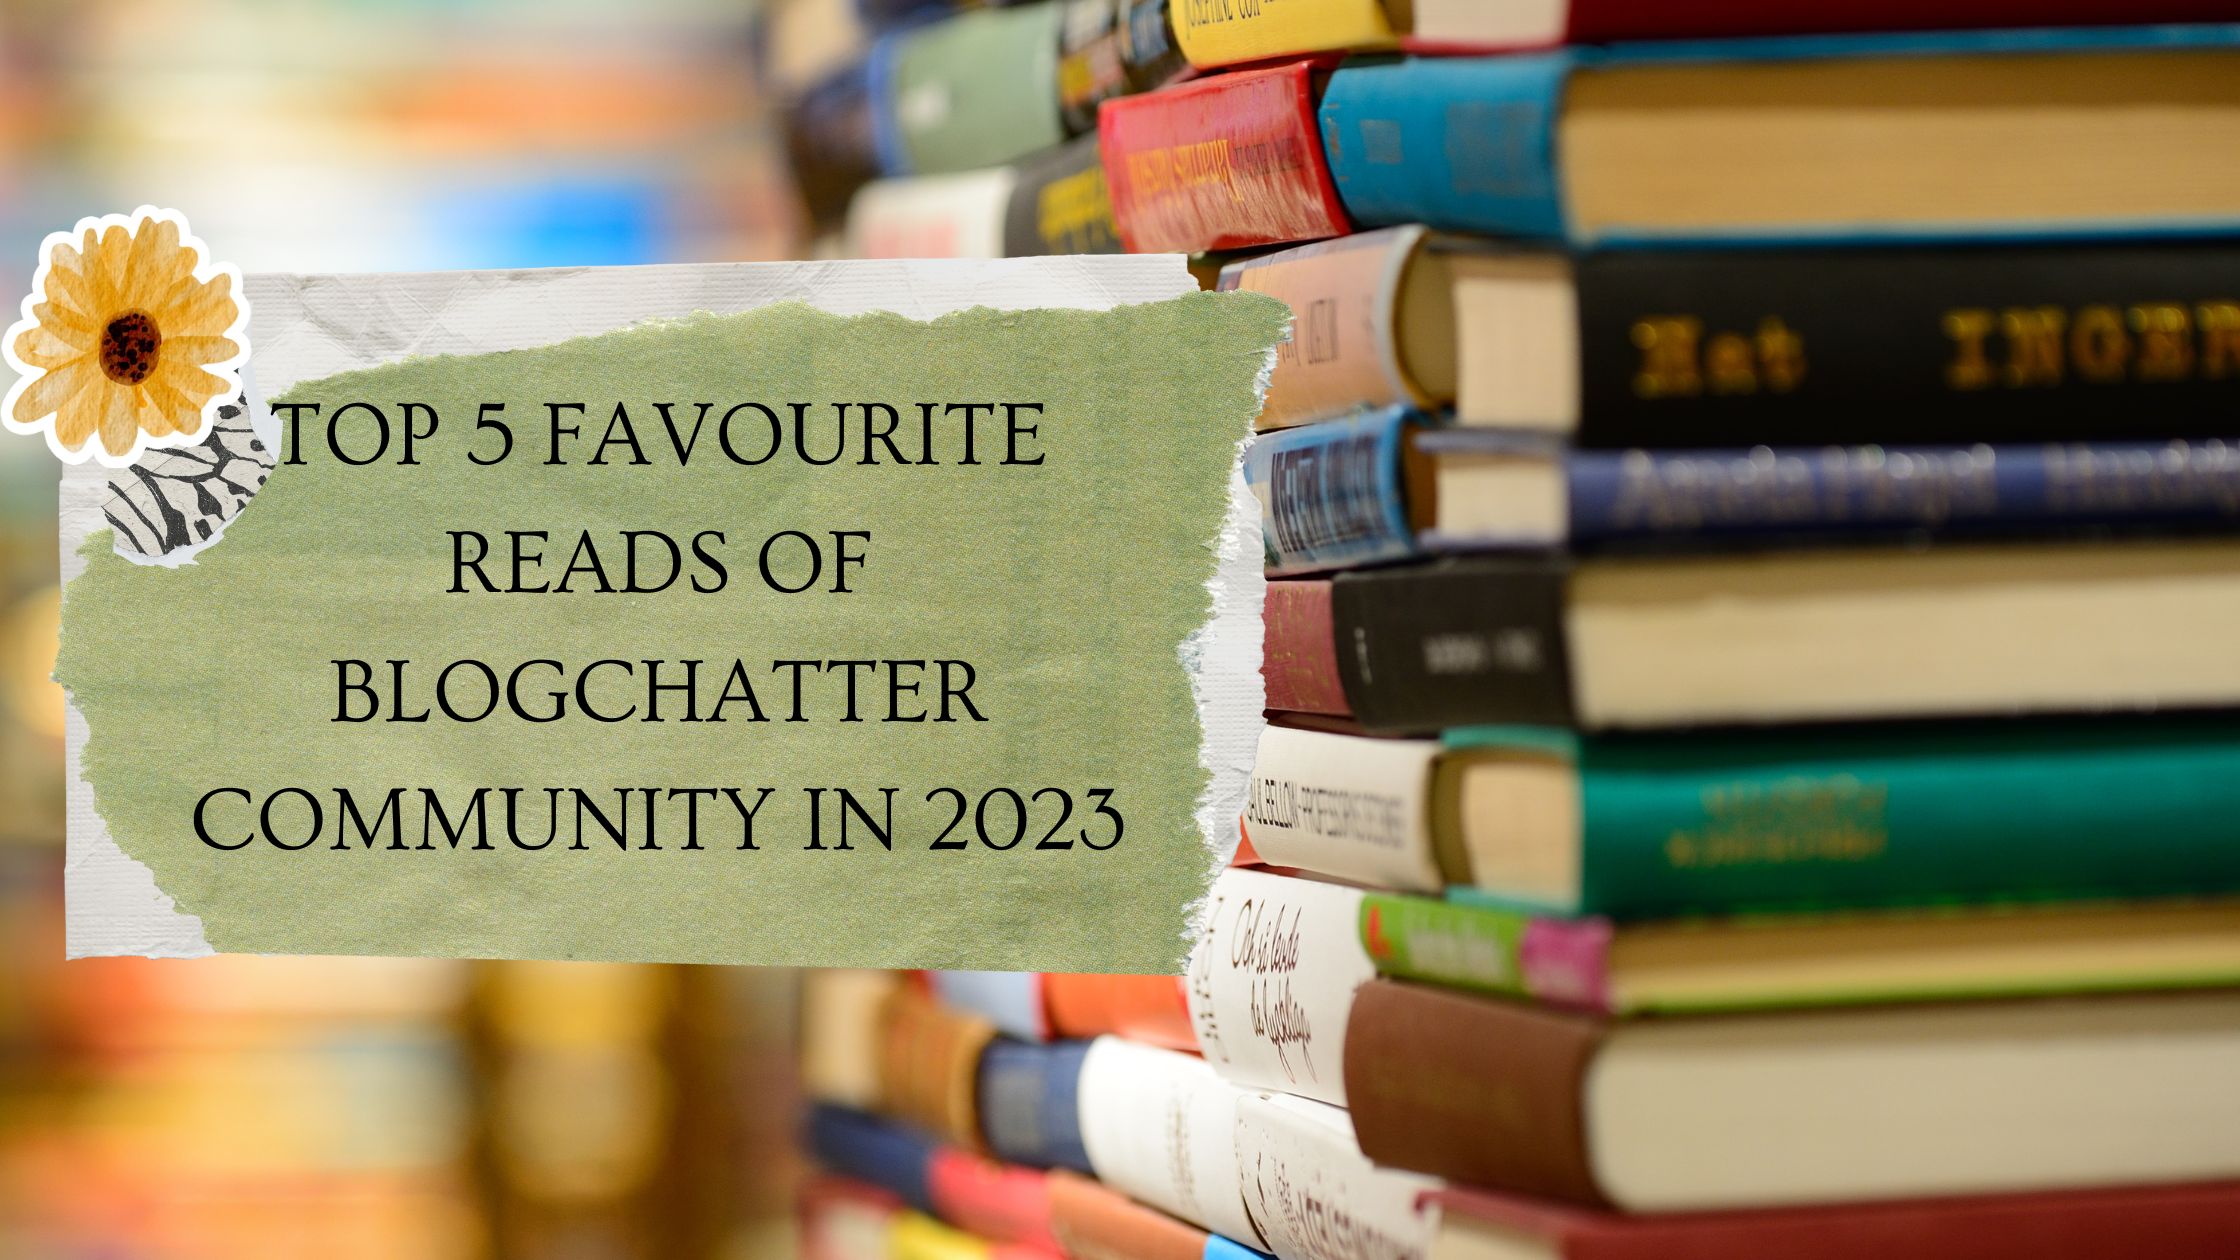 Top 5 Favourite reads of Blogchatter community in 2023